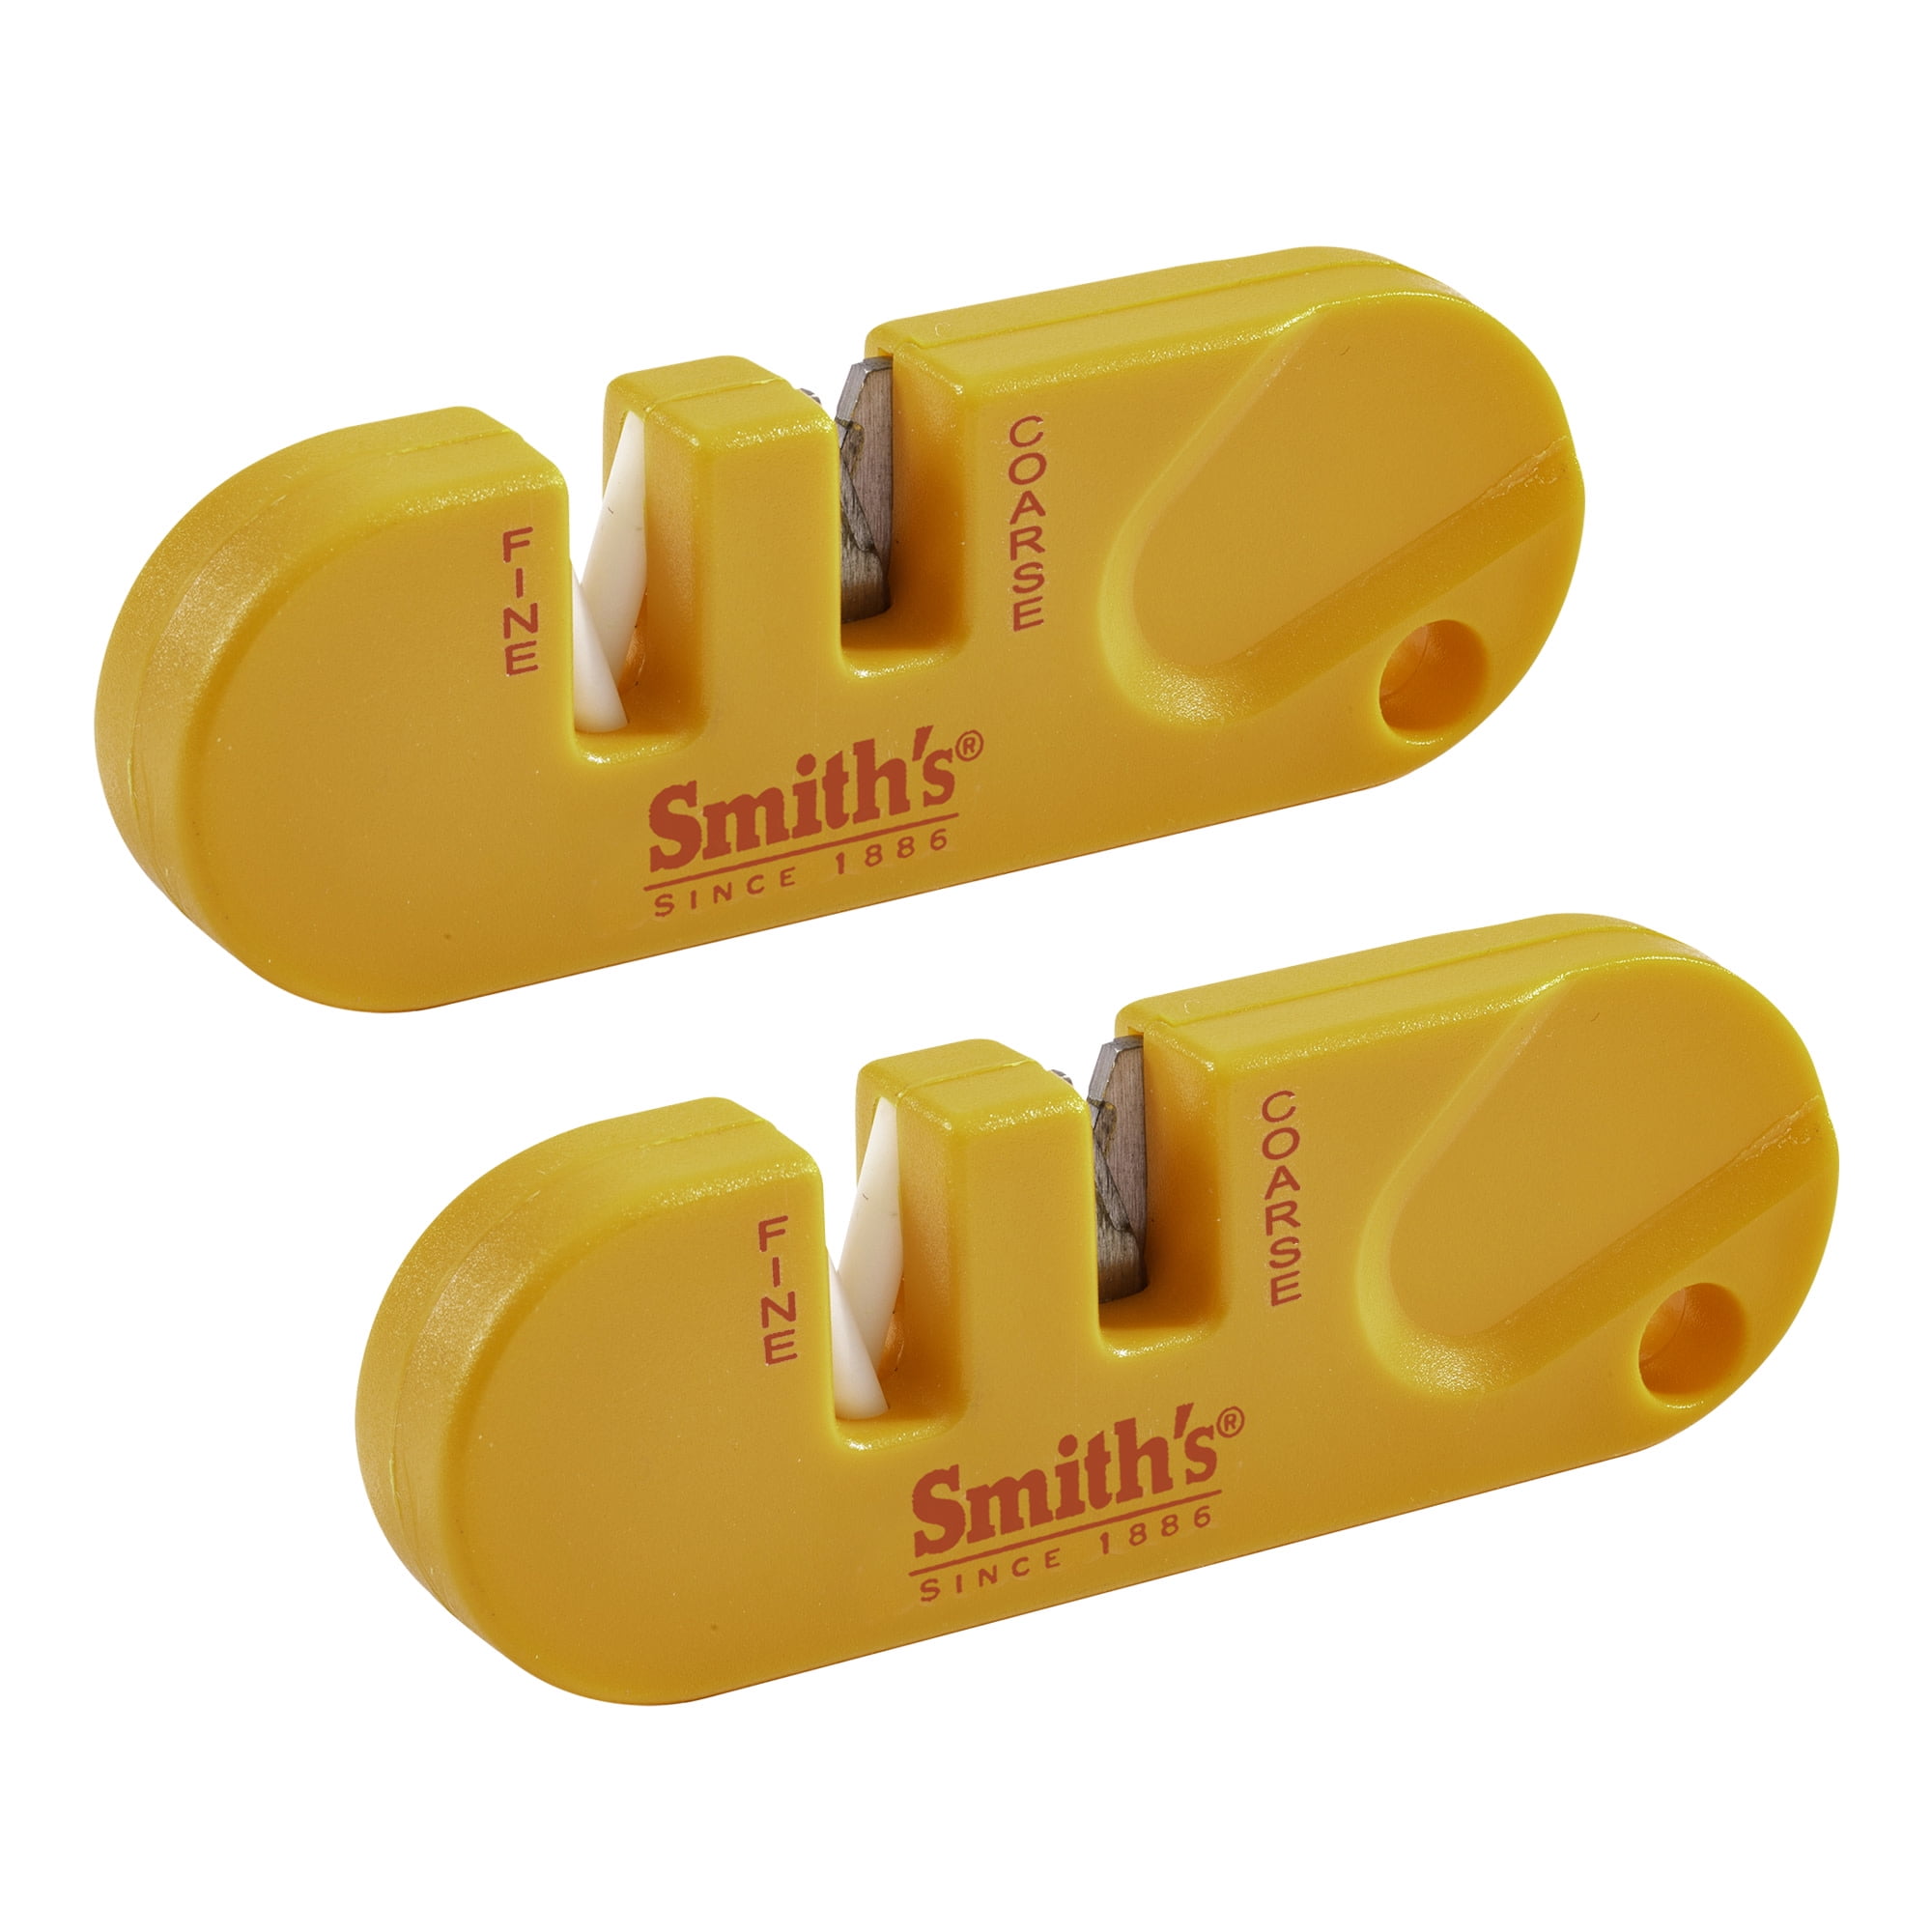 Smith's Pack Pal Knife Sharpener and Knife - 51018